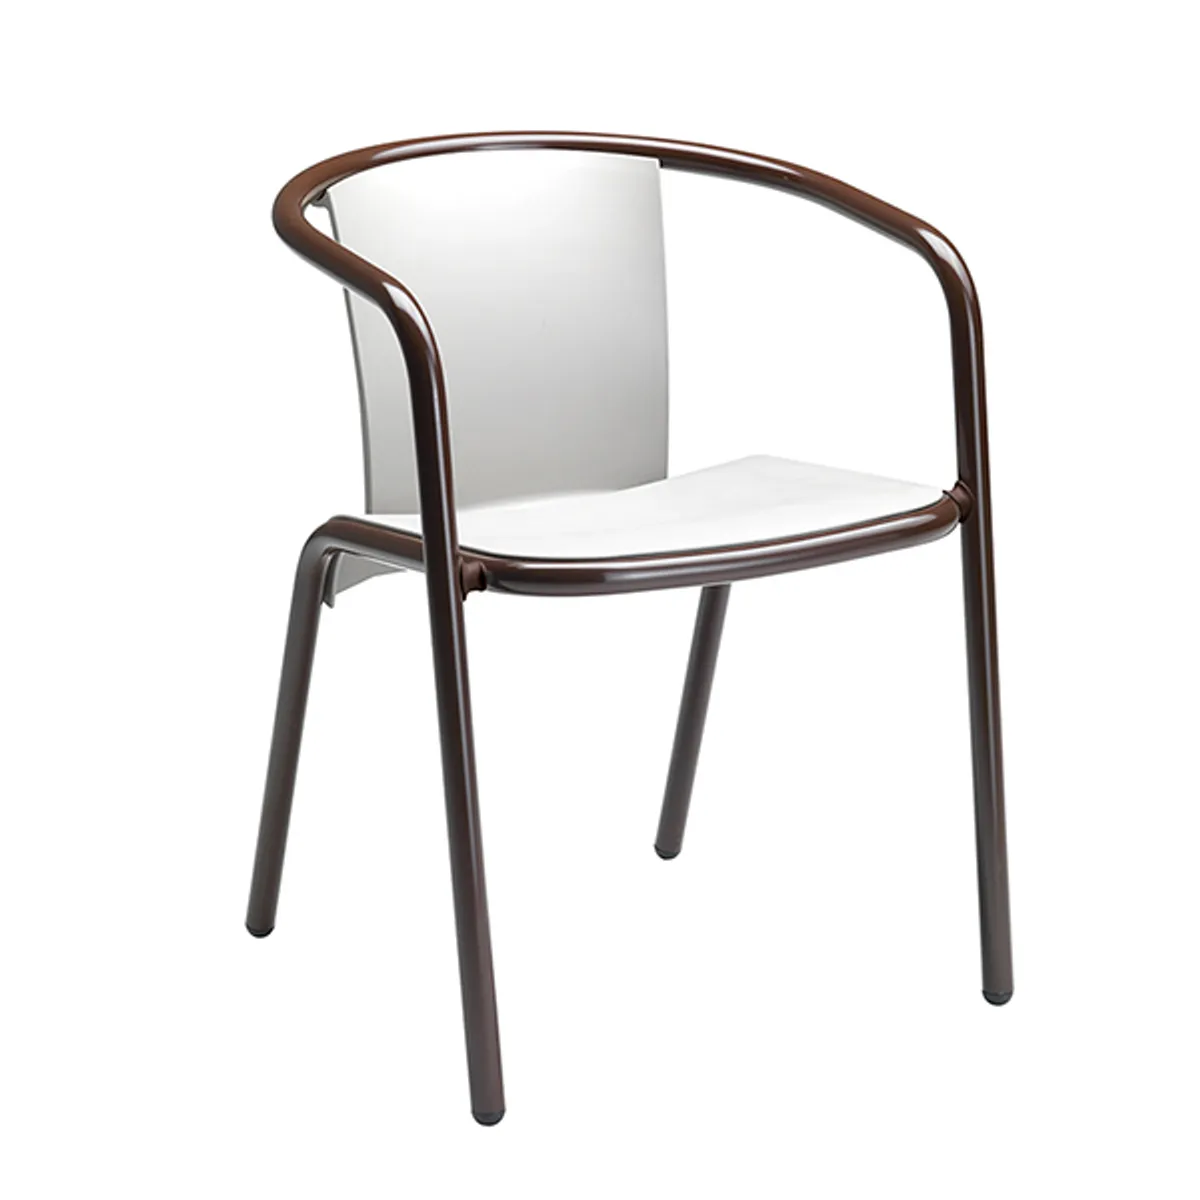 Mare Armchair For Outdoors In Brown And White Finish